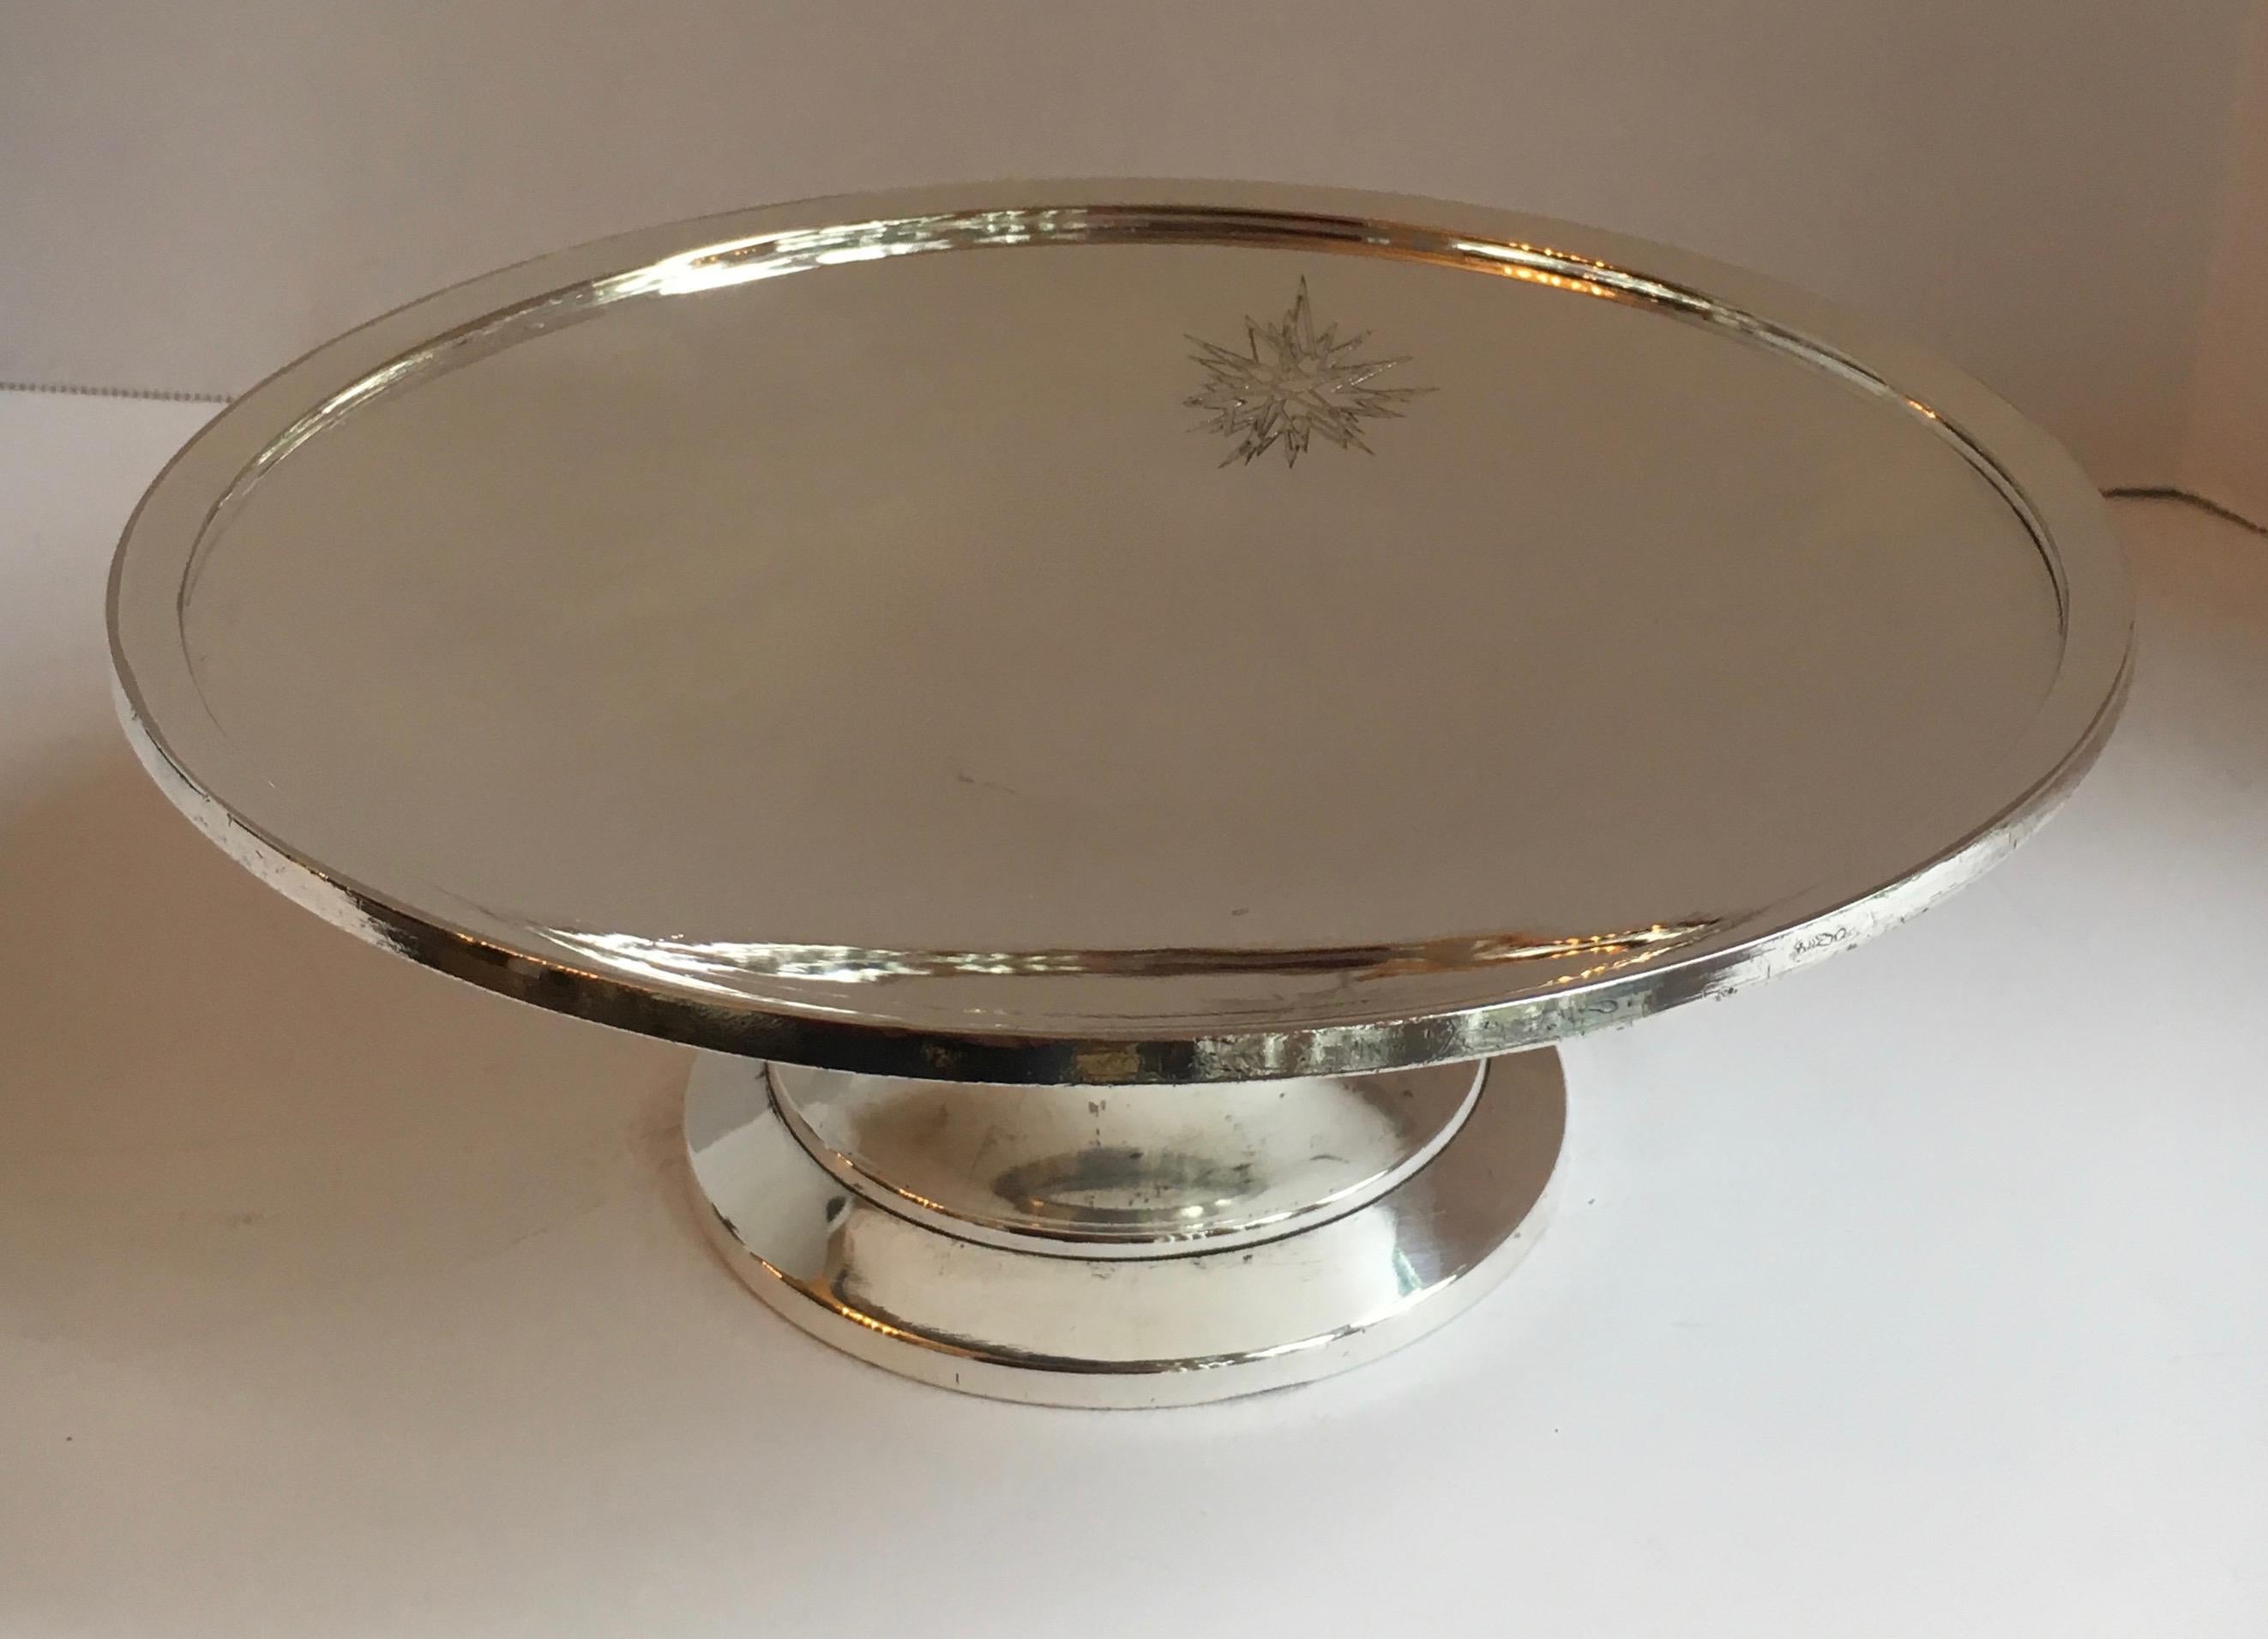 Beverly Hilton Silver Footed Cake Plate 1